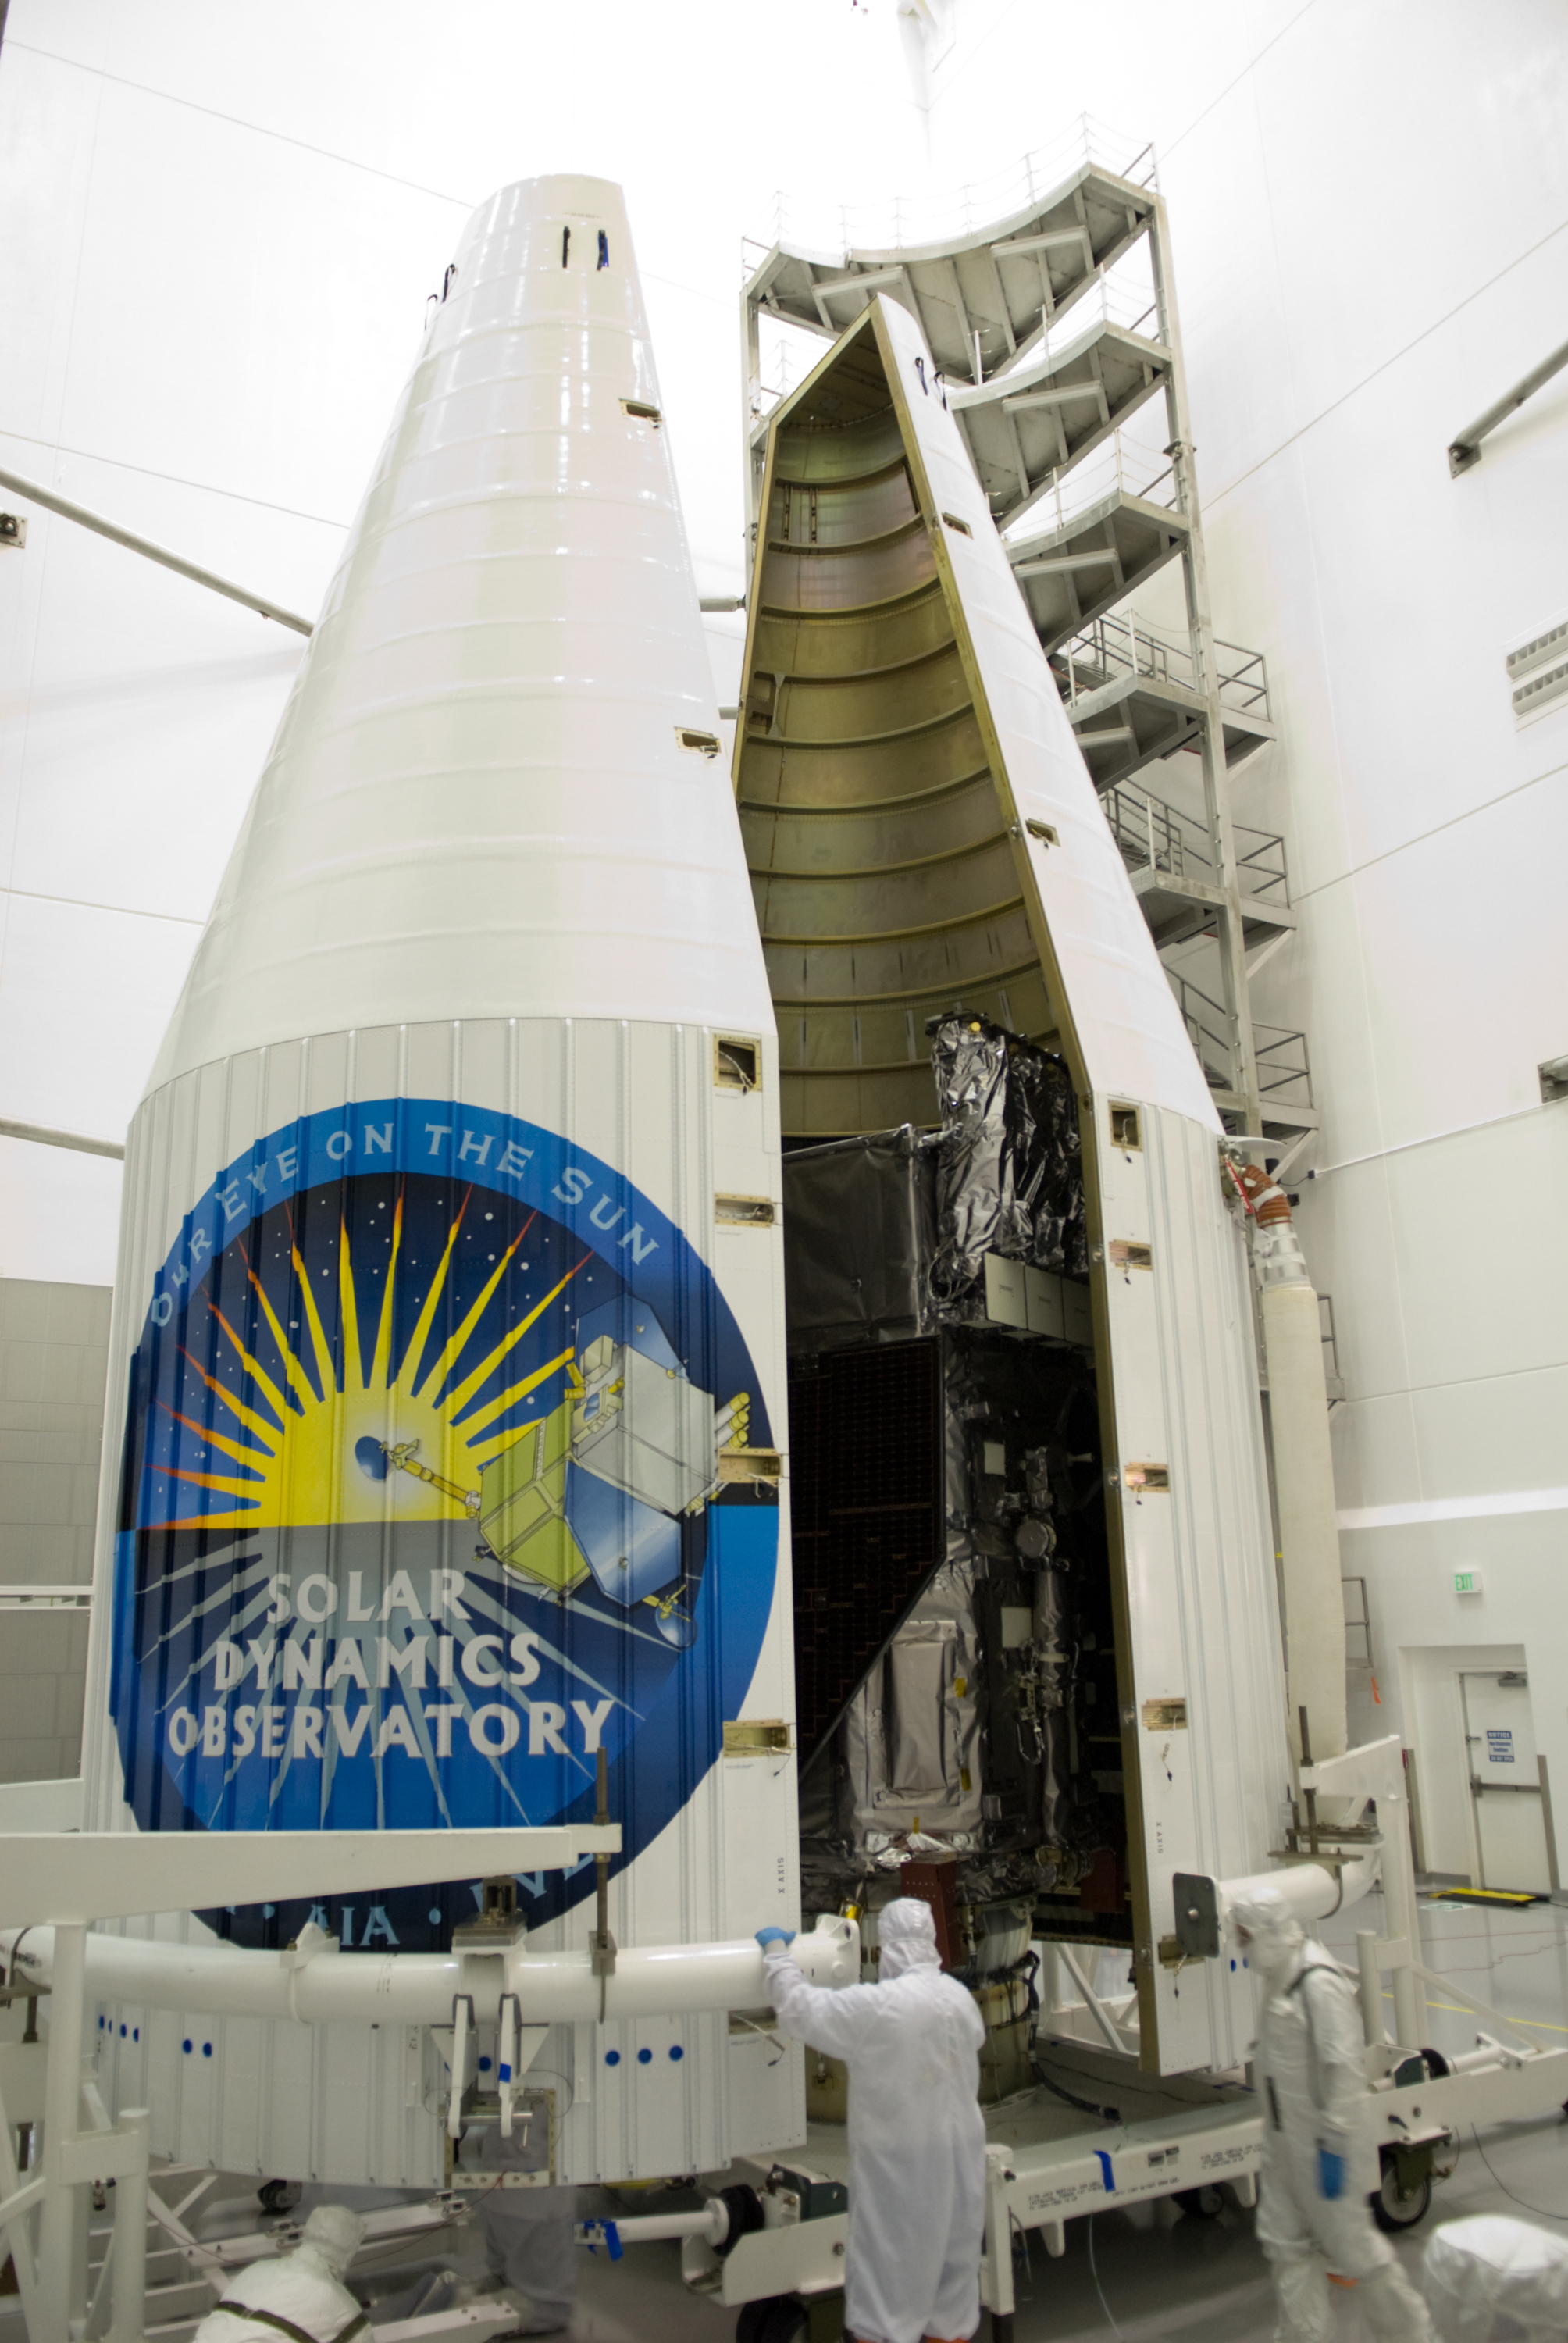 Second half of the payload failing moved around SDO